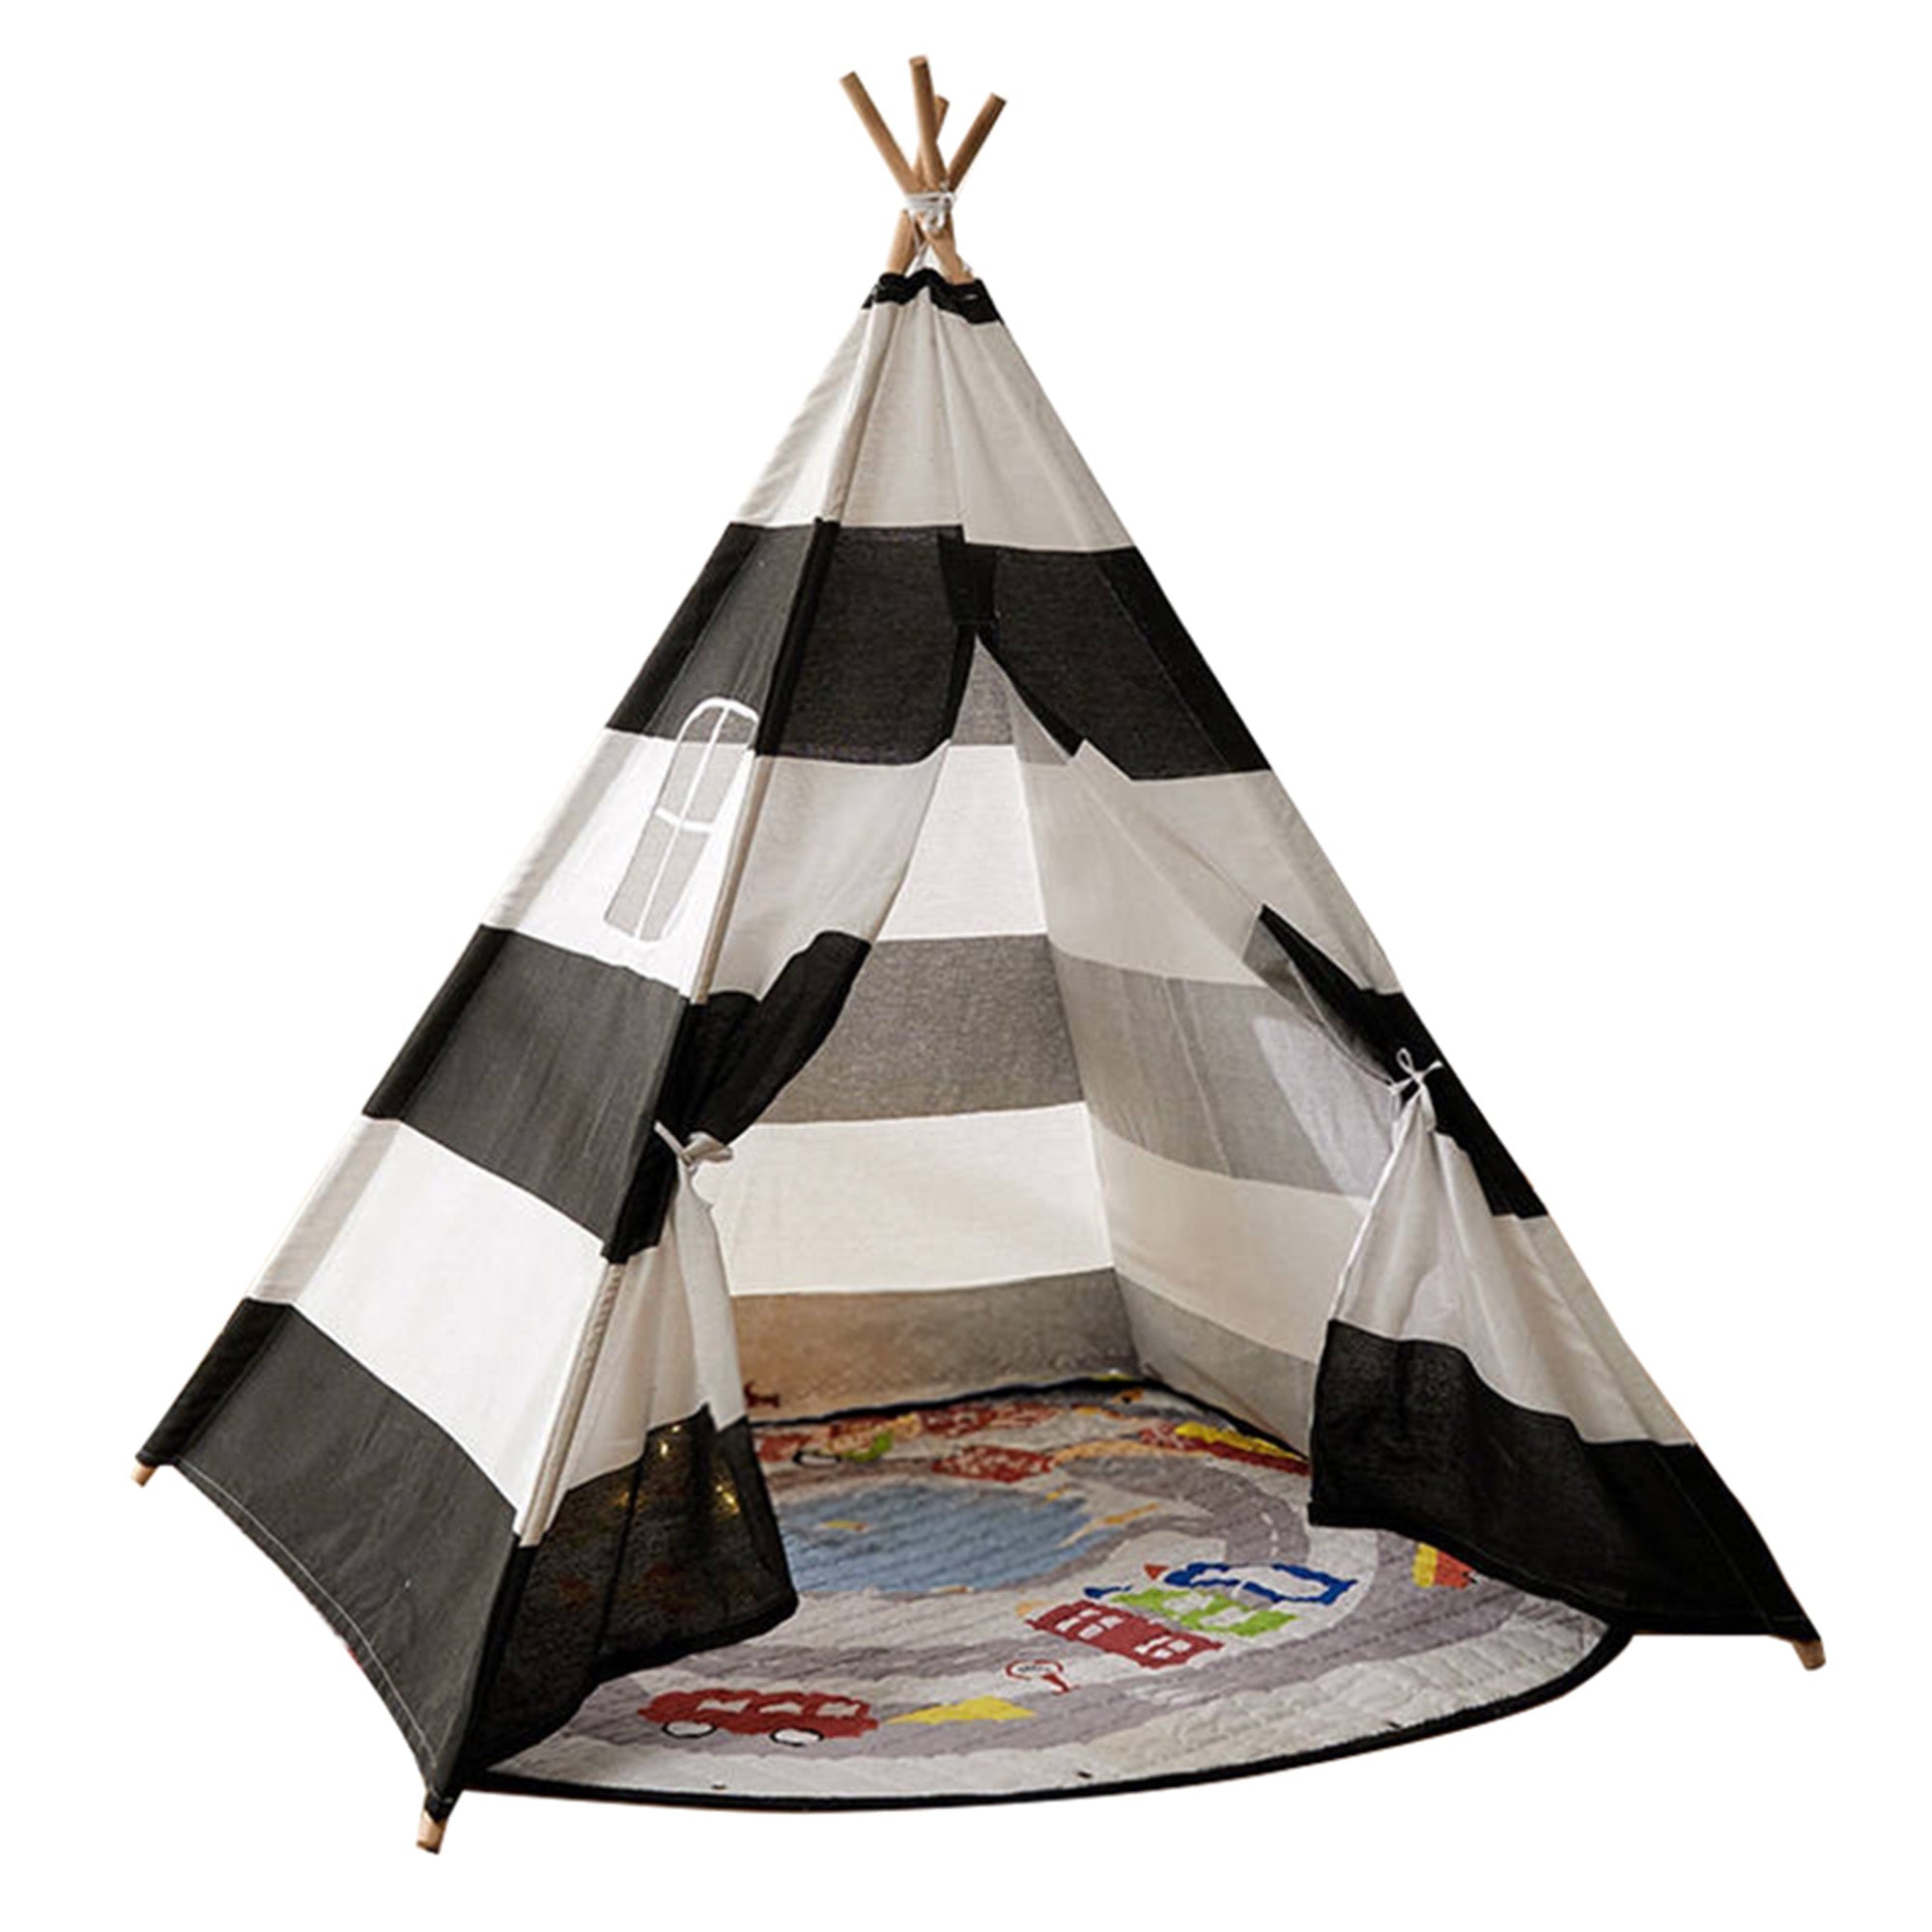 Large Foldable Kids Canvas Teepee Play Tent With Lights ( Black & White )